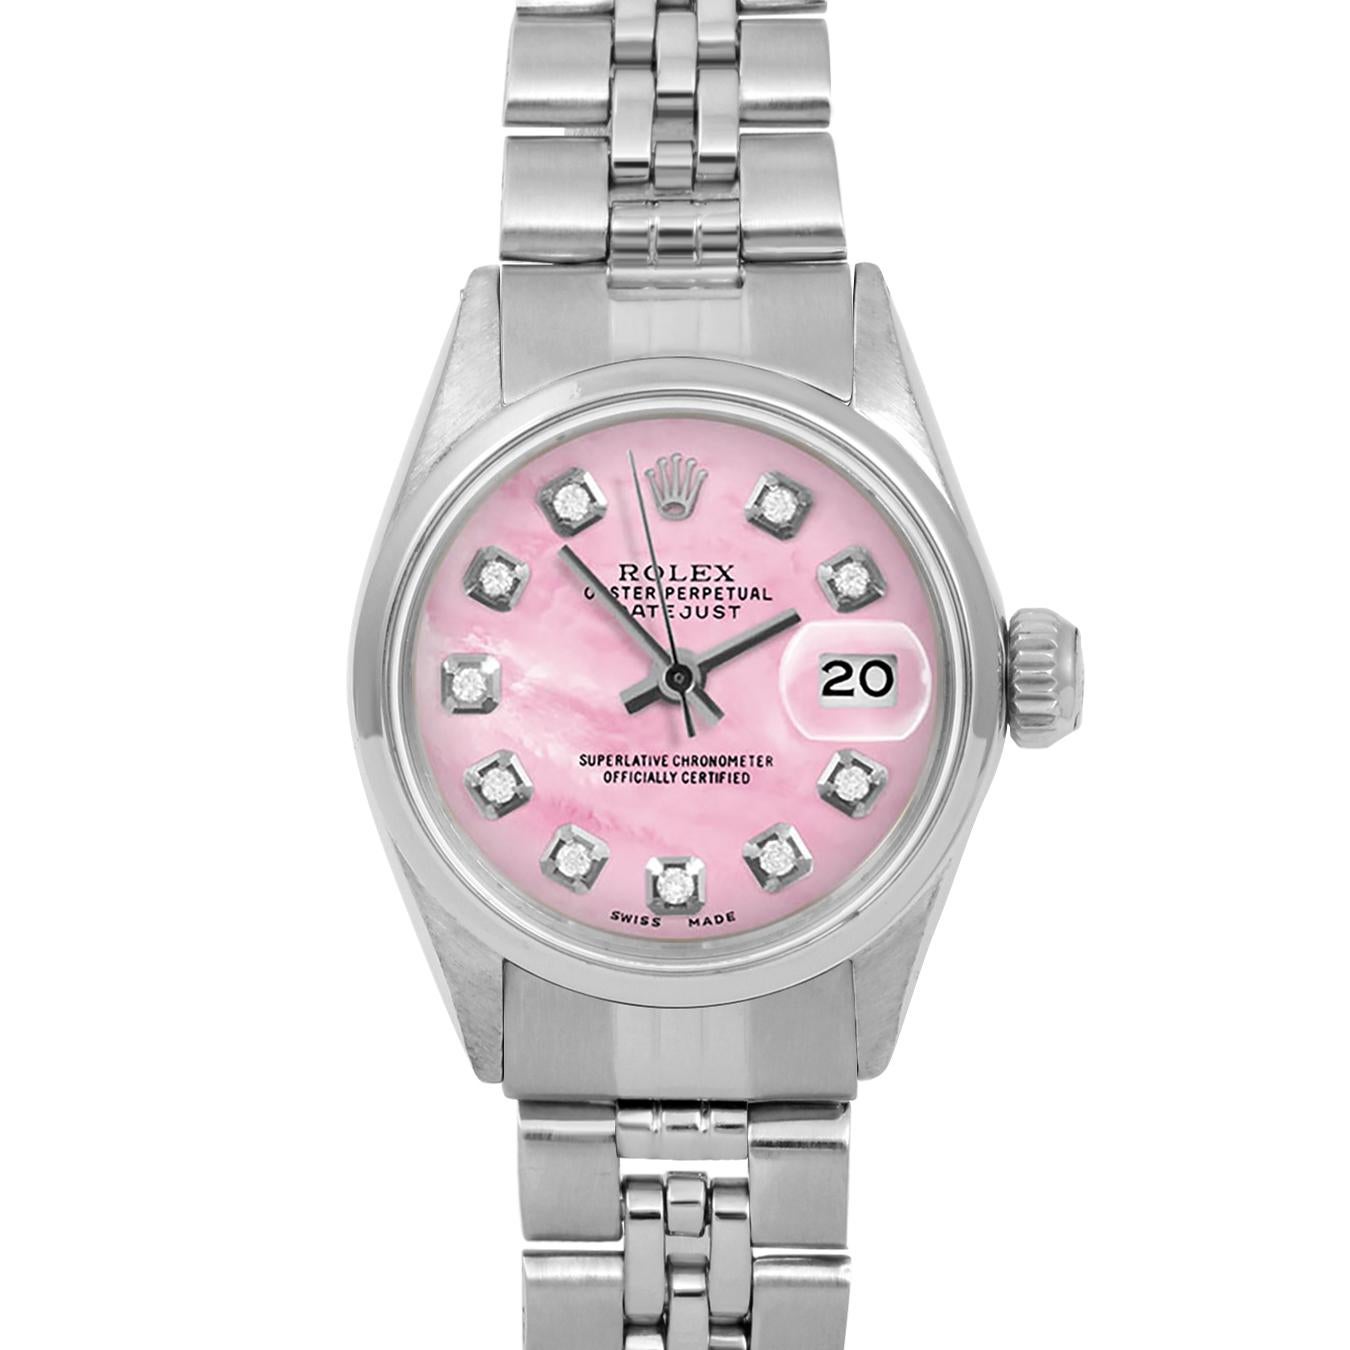 Brand : Rolex
Model : Datejust (Non-Quickset Model)
Gender : Ladies
Metals : Stainless Steel
Case Size : 24 mm

Dial : Custom Pink Mother Of Pearl Diamond Dial (This dial is not original Rolex And has been added aftermarket yet is a beautiful Custom